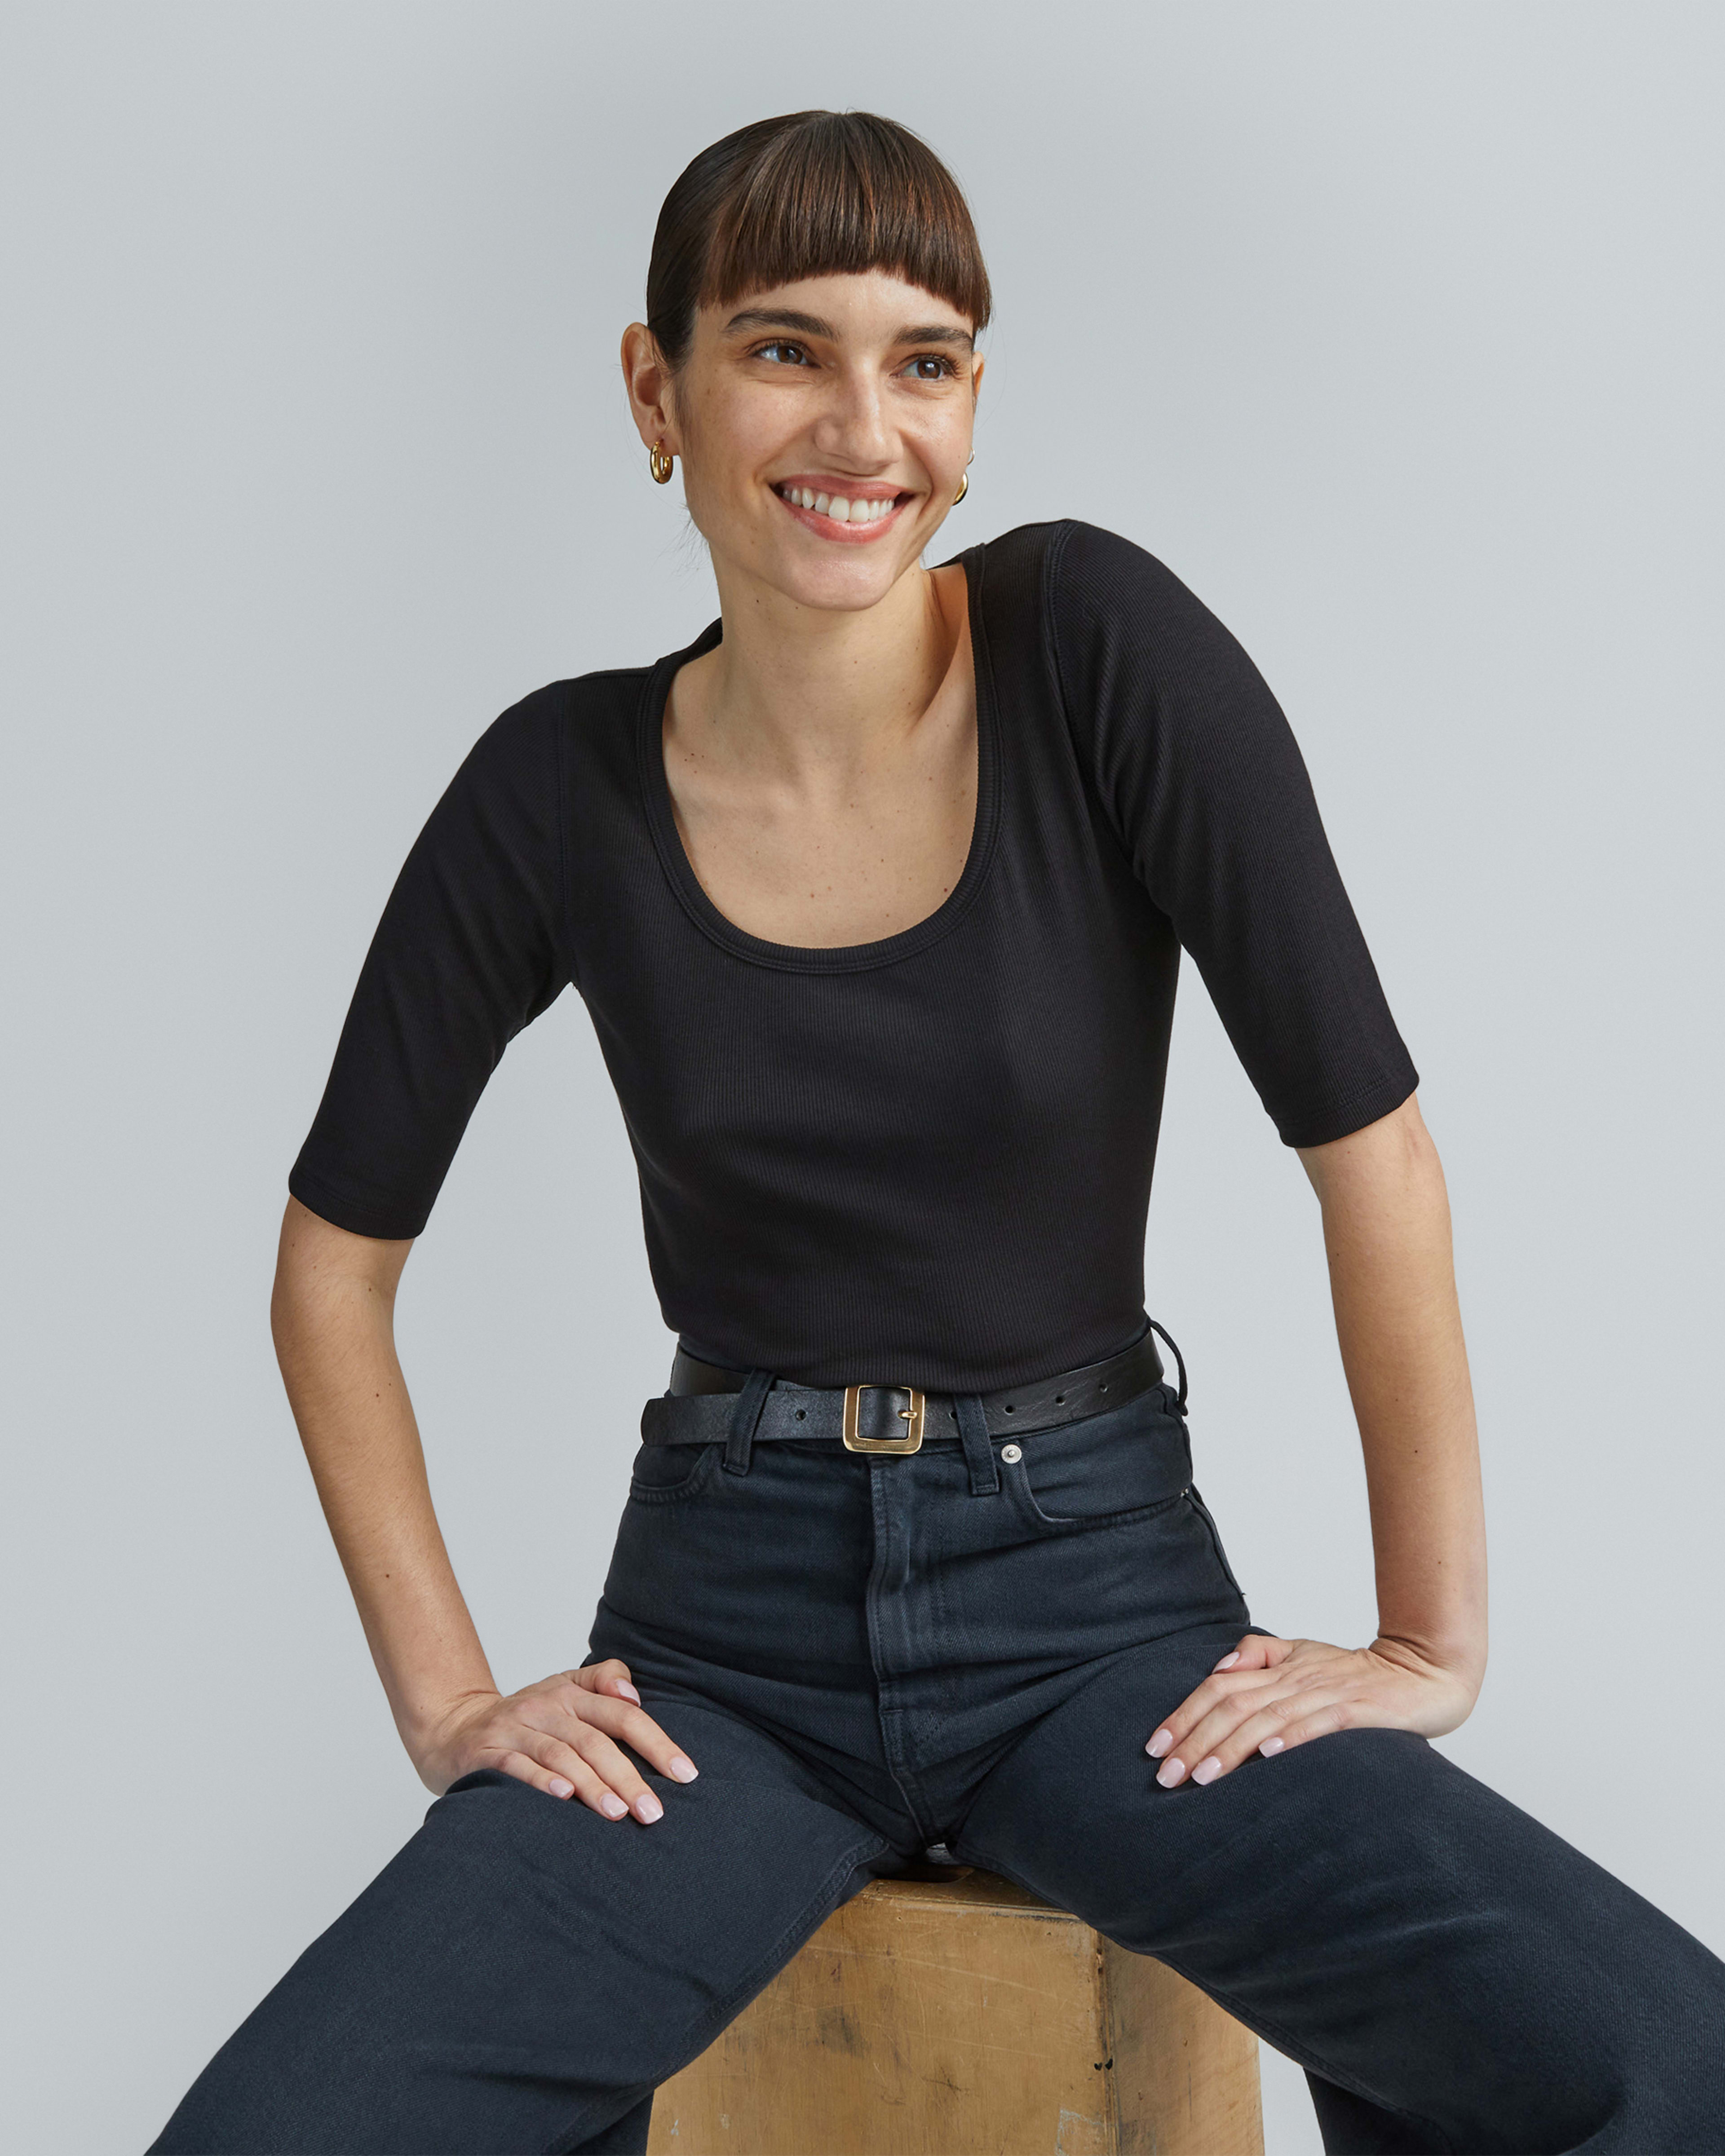 Everlane Editions: Women's Workwear Review